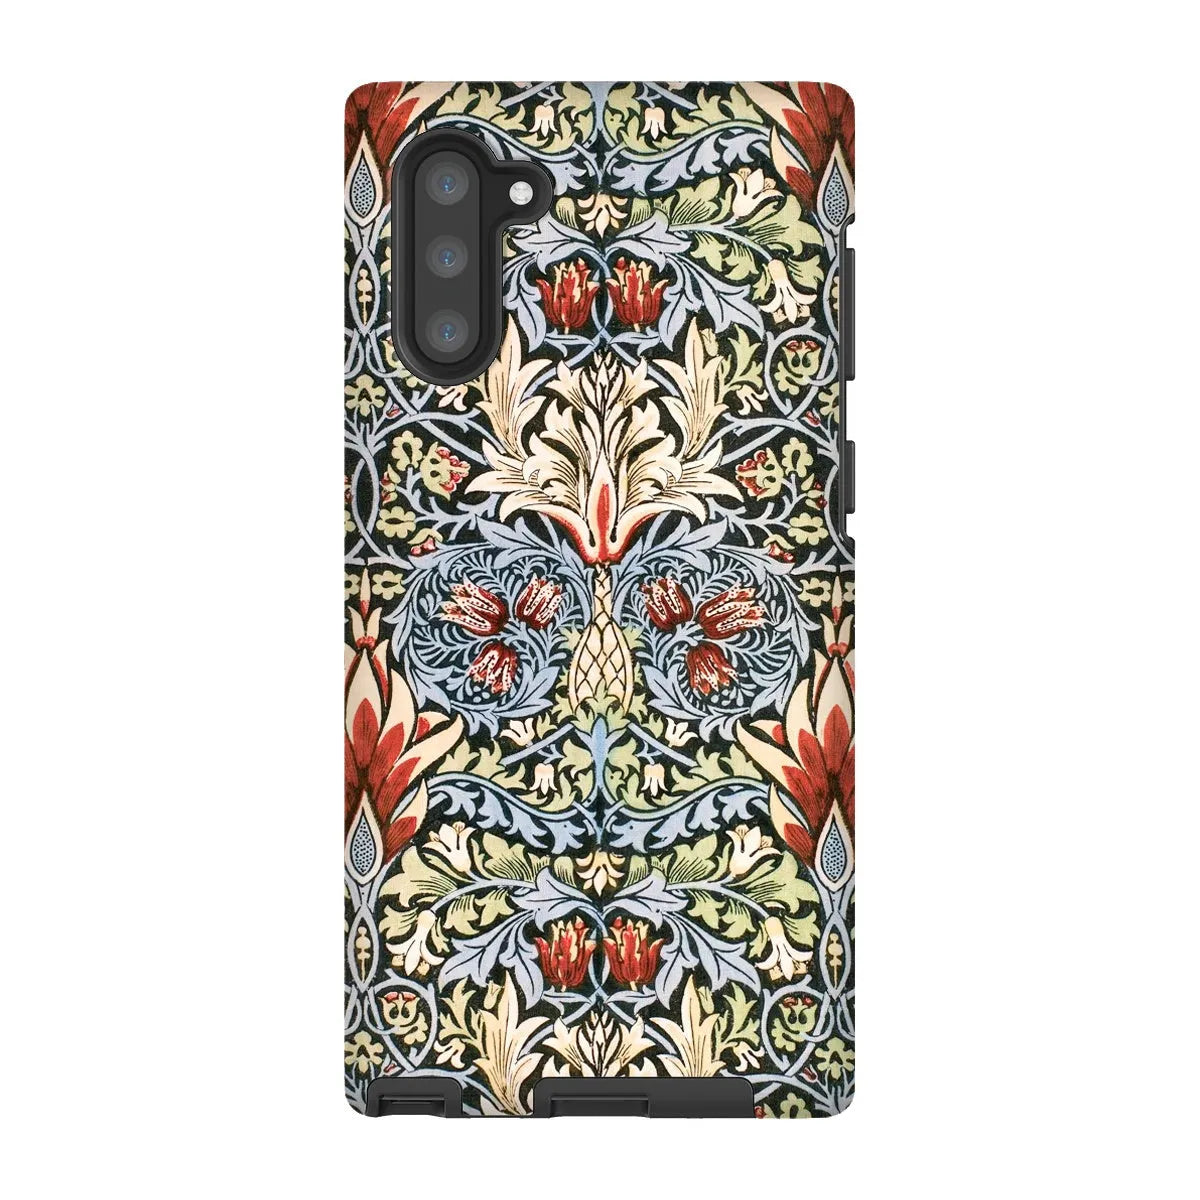 Snakeshead - Arts And Crafts Pattern Phone Case - William Morris - Samsung Galaxy Note 10 / Matte - Mobile Phone Cases